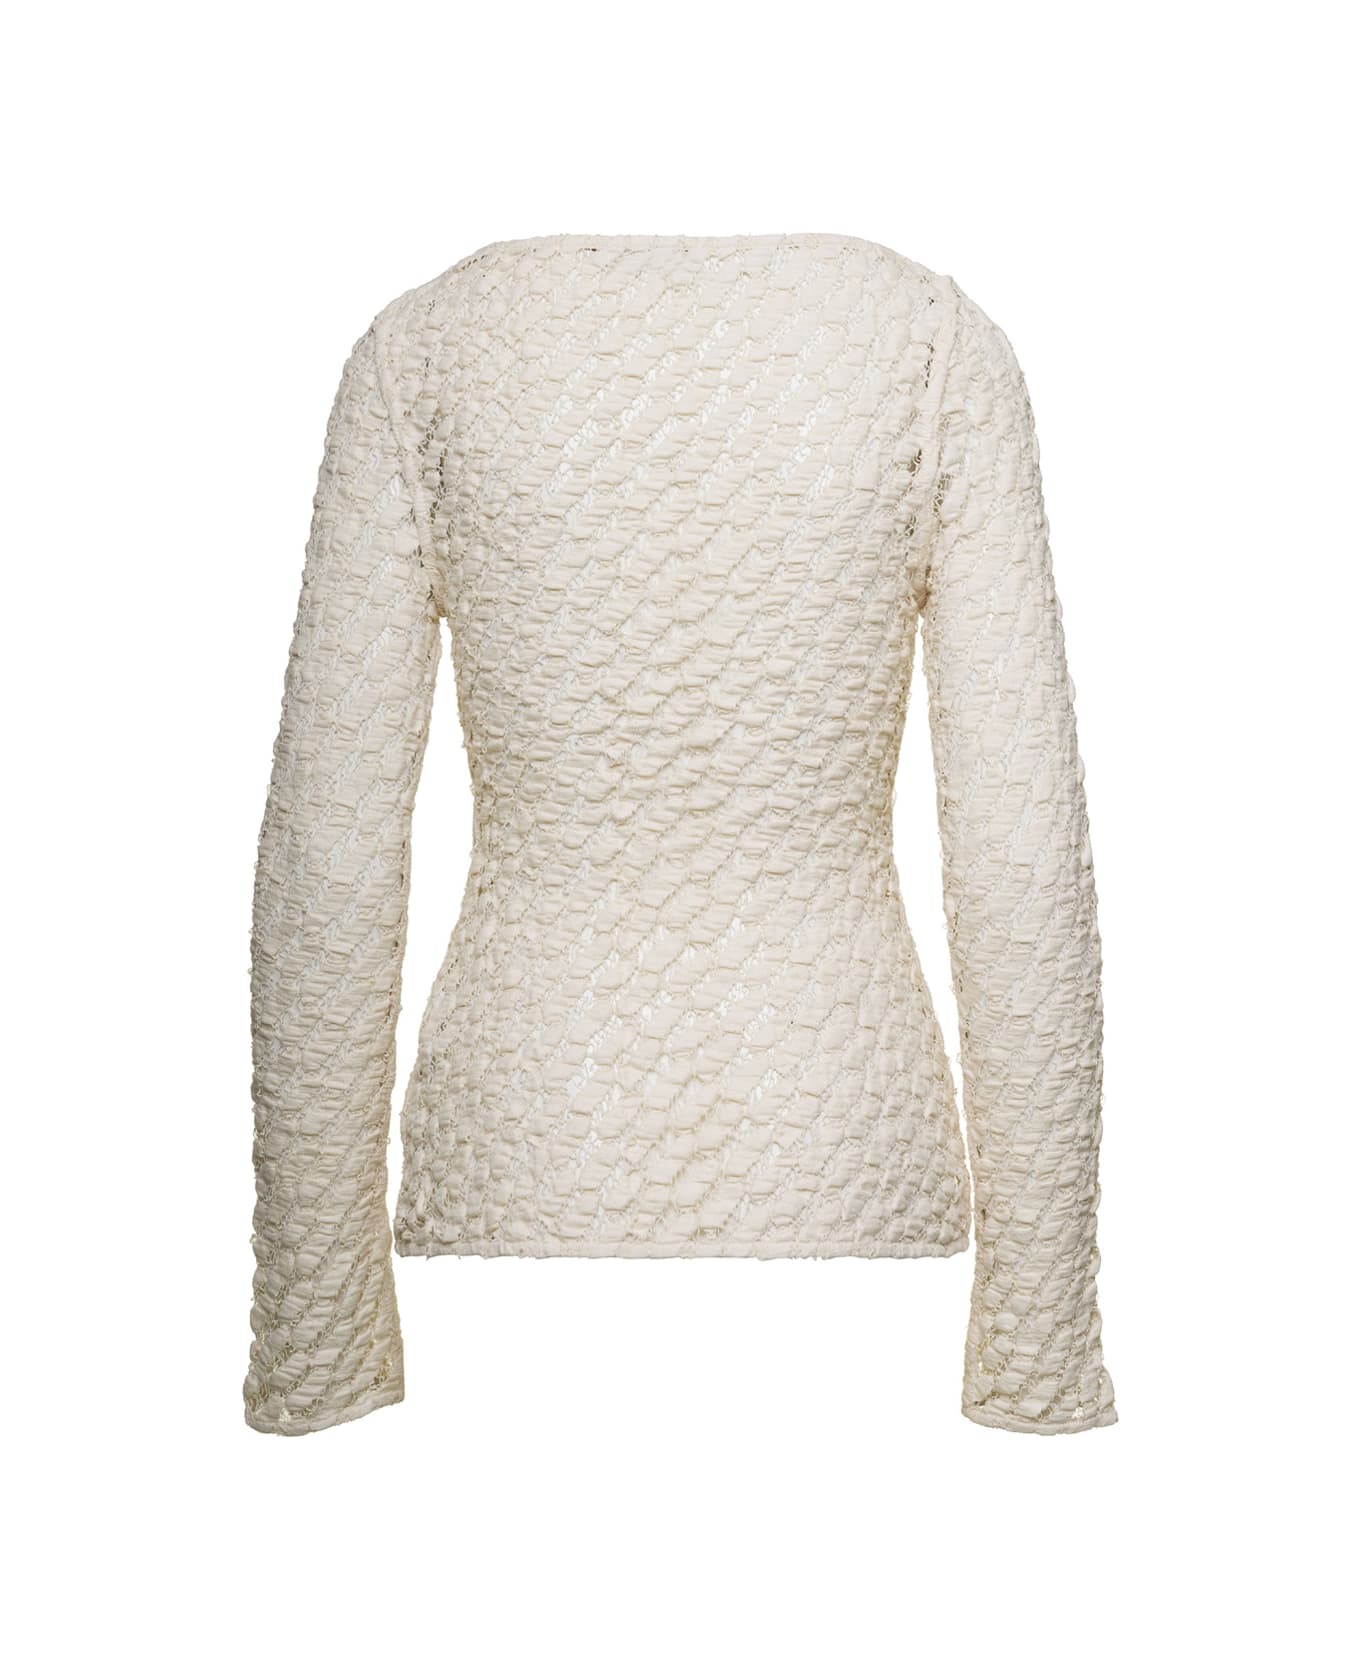 Róhe Beige Sweater With Boat Neckline In Cotton Blend Woman - White ニットウェア